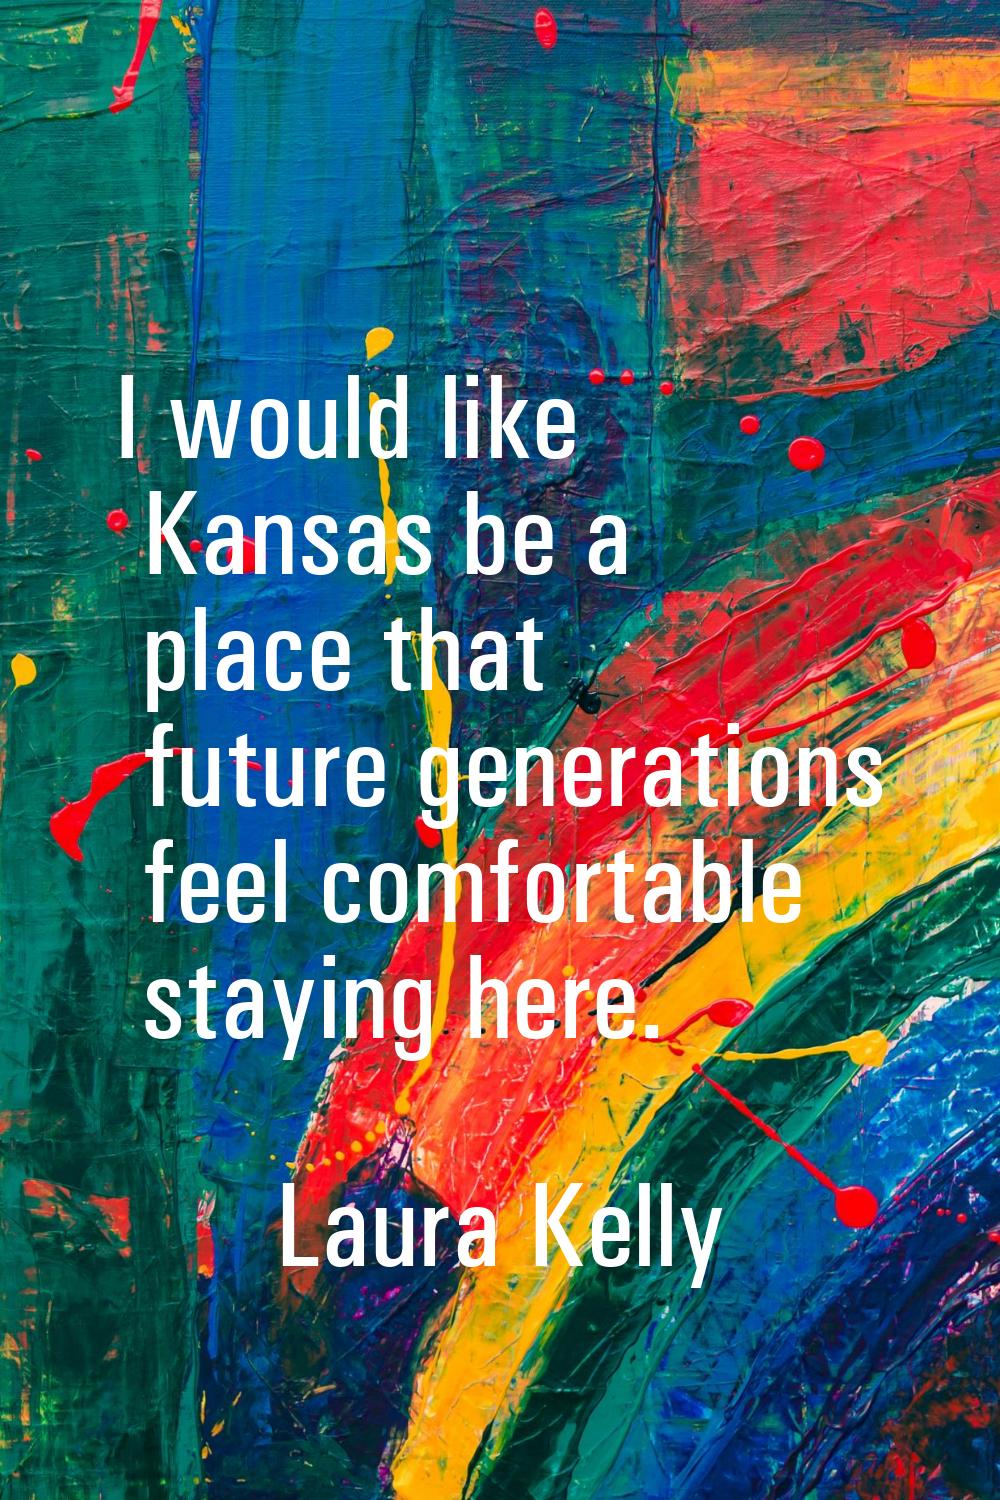 I would like Kansas be a place that future generations feel comfortable staying here.